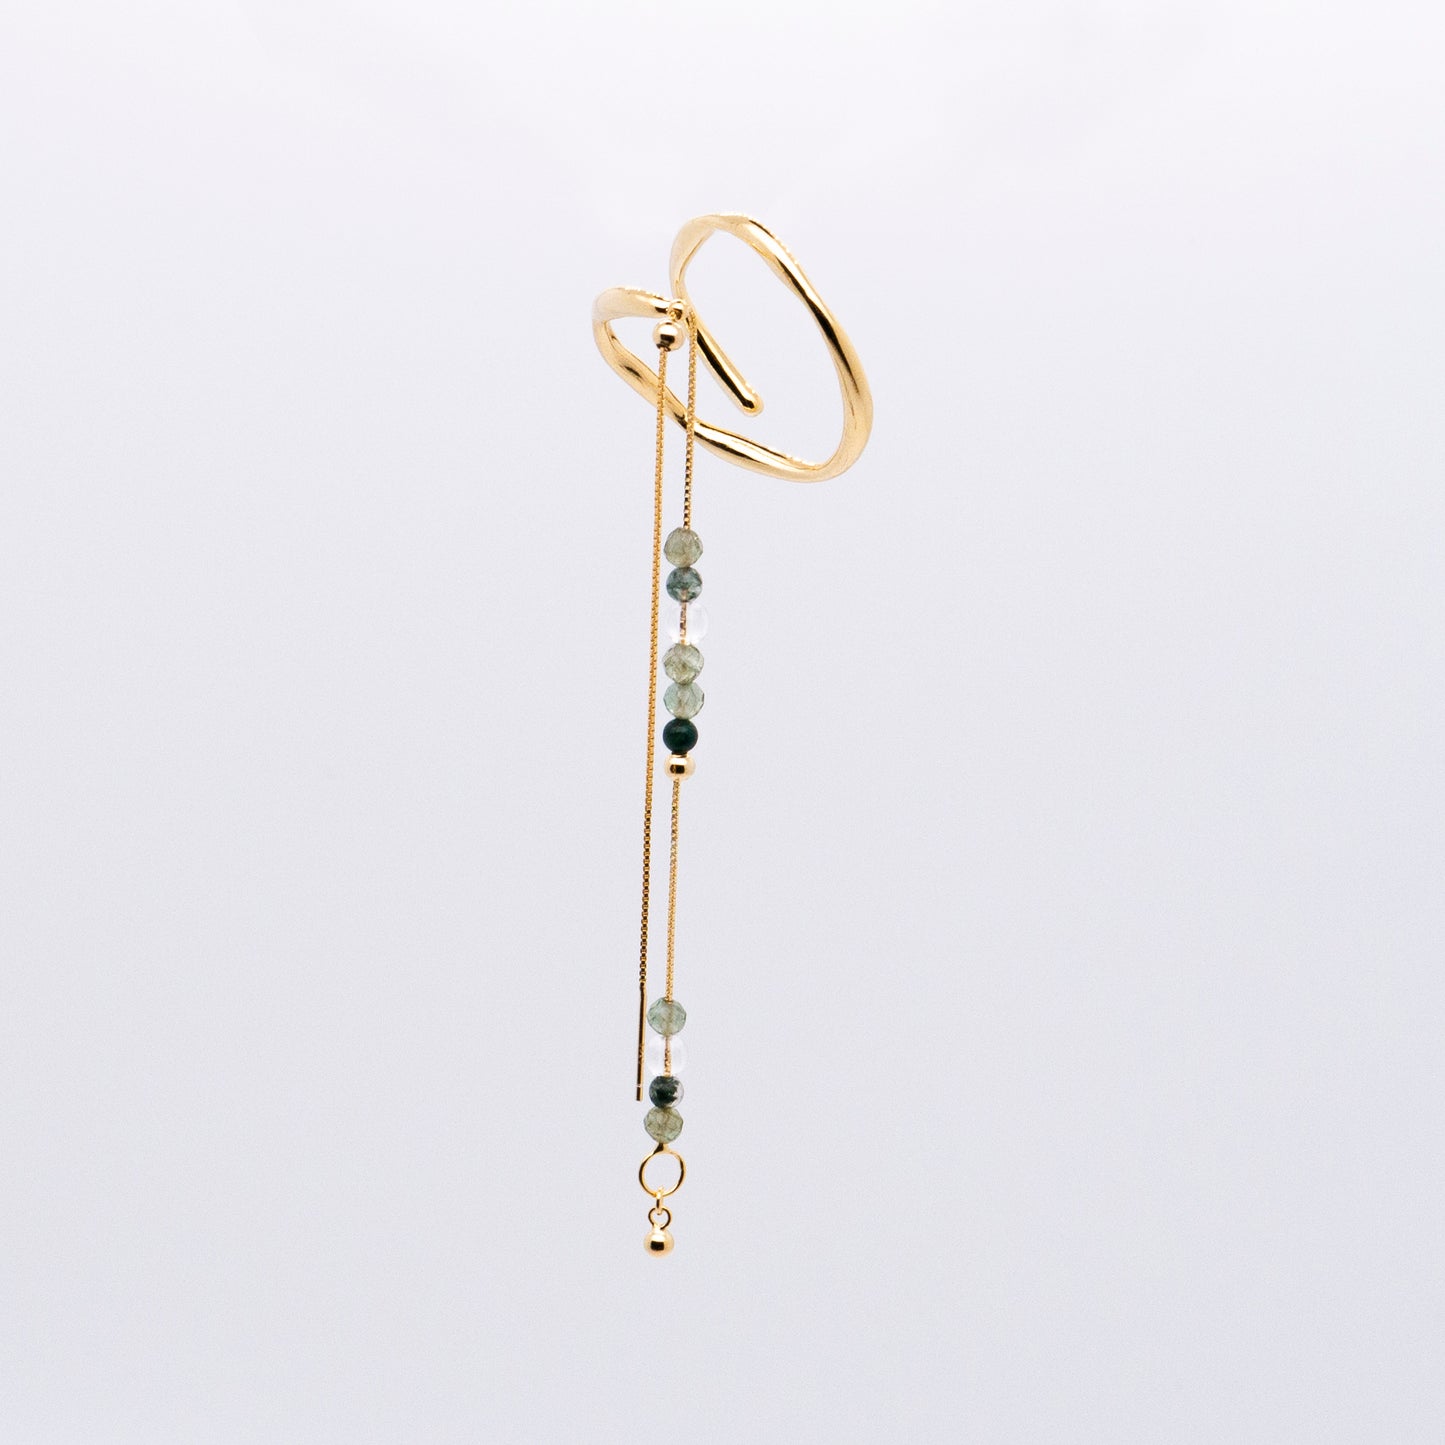 Bubble Nebula-Double Hoop Ear Cuff+Beading Threader Earring (Gold Plated)